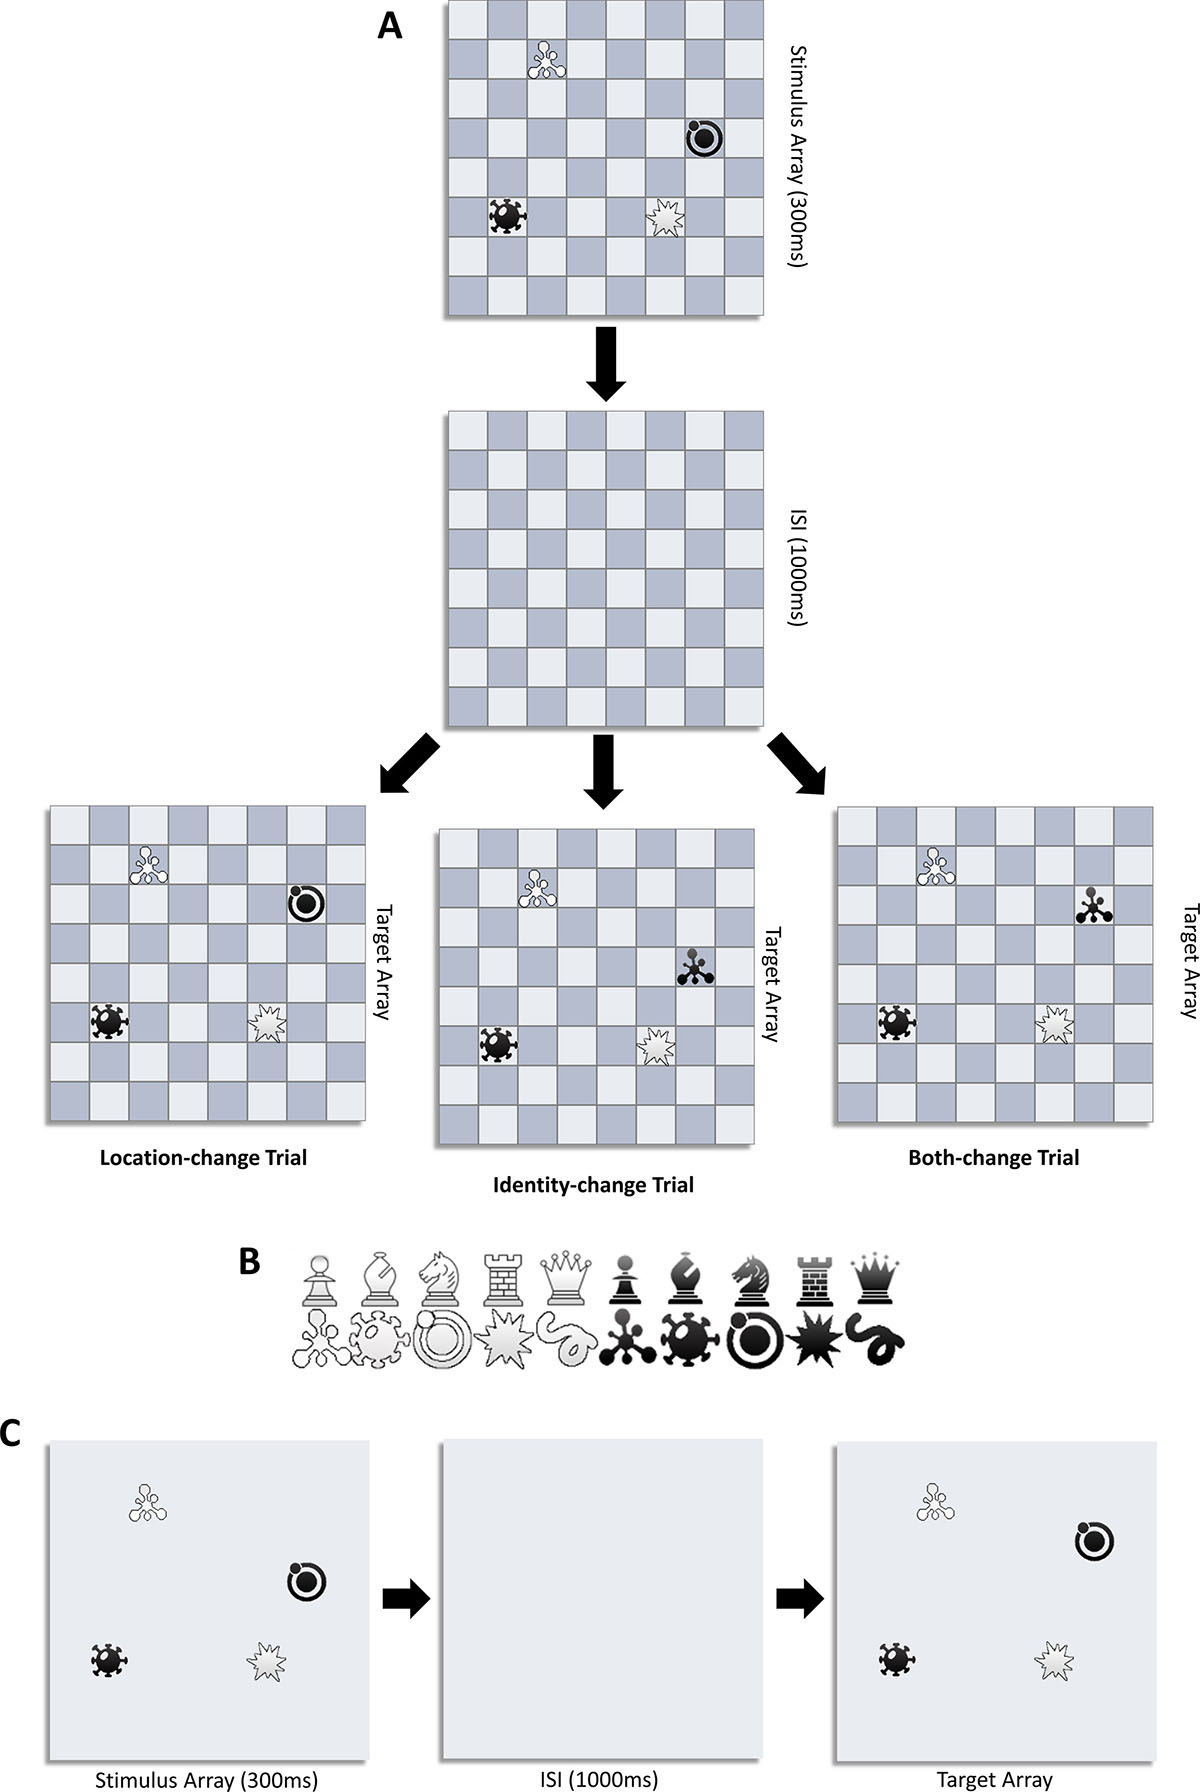 Diagram with three parts. First is a stimulus array, then a blank chess board, then three target arrays — location-change trial, identity-change trial, and both-change trial. Part two is two sets of chess pieces, one white and one black. Each set has five traditional chess pieces and five non-traditional. Third part shows a stimulus array, then a blank square, then a target array.